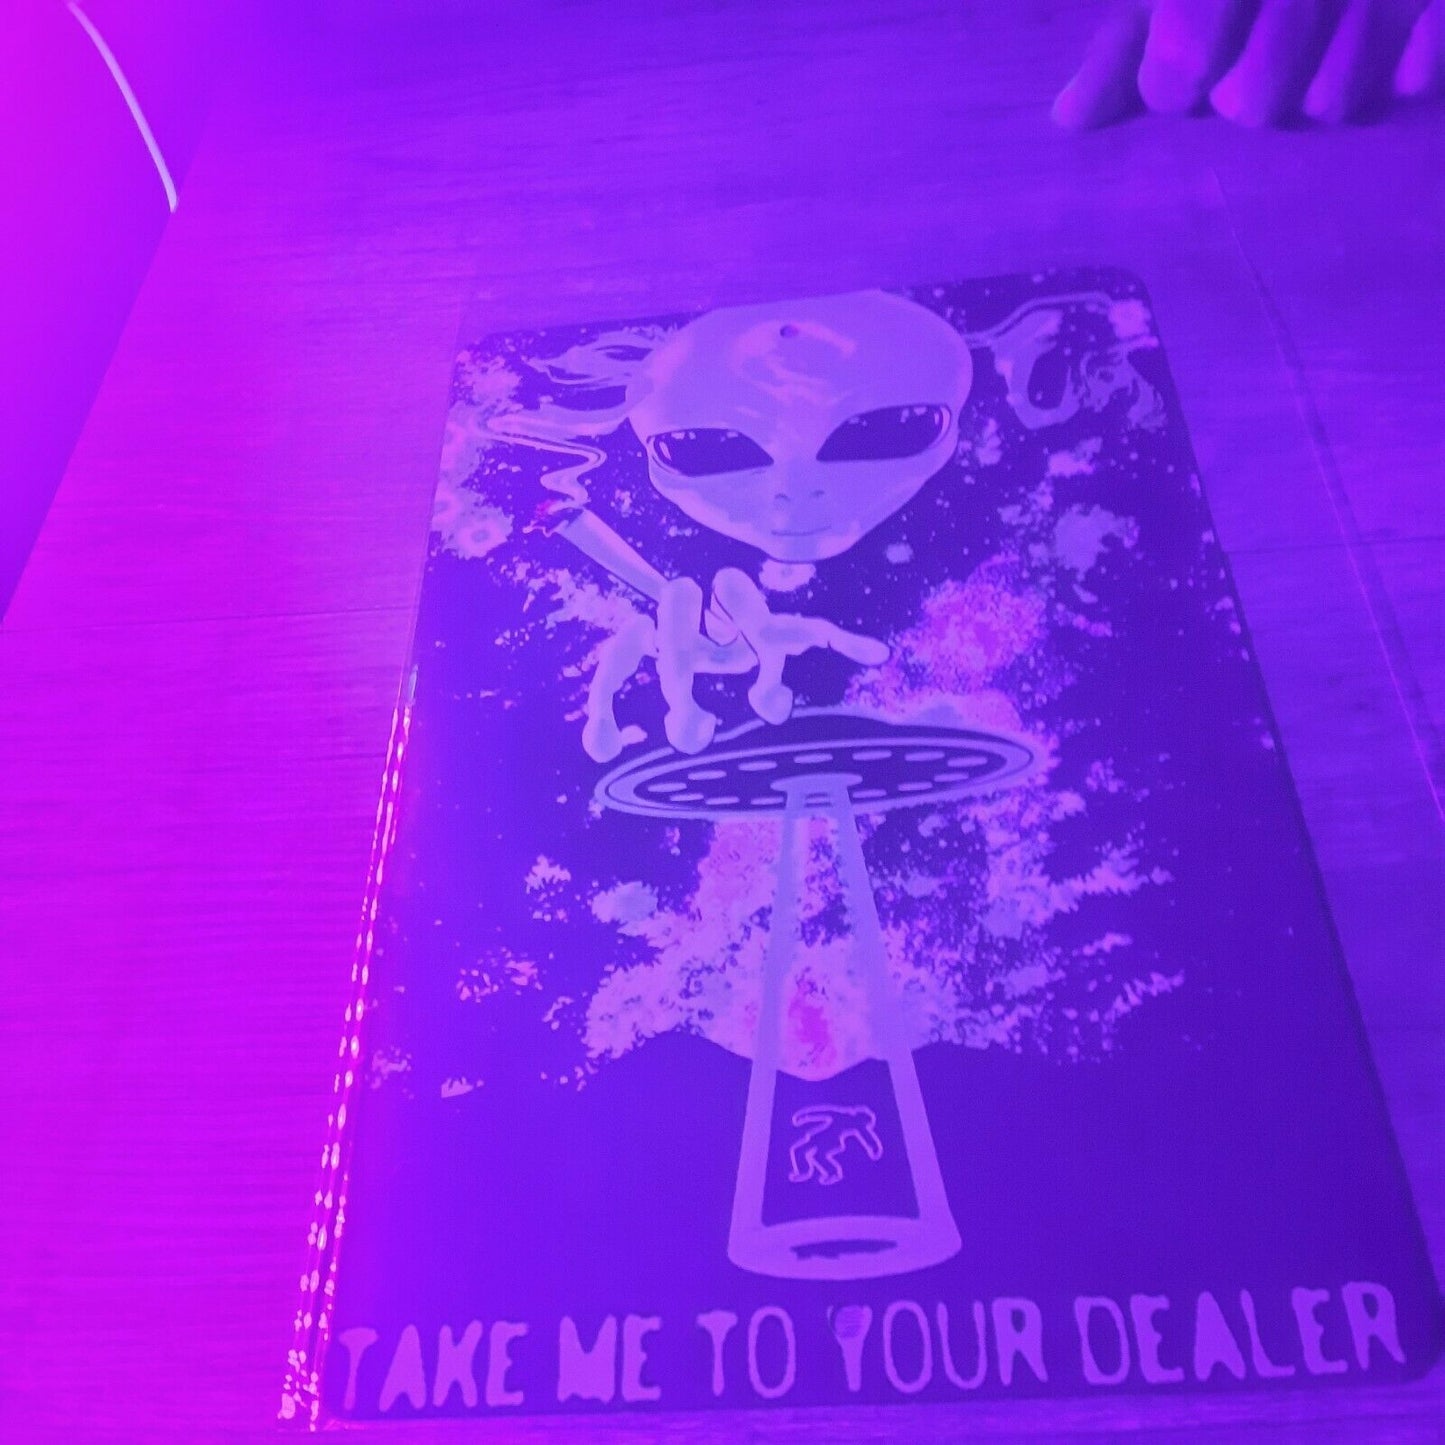 Take Me To Your Dealer Alien Misc Poster Style 8x12 Metal Wall Sign 420 Mary Jane